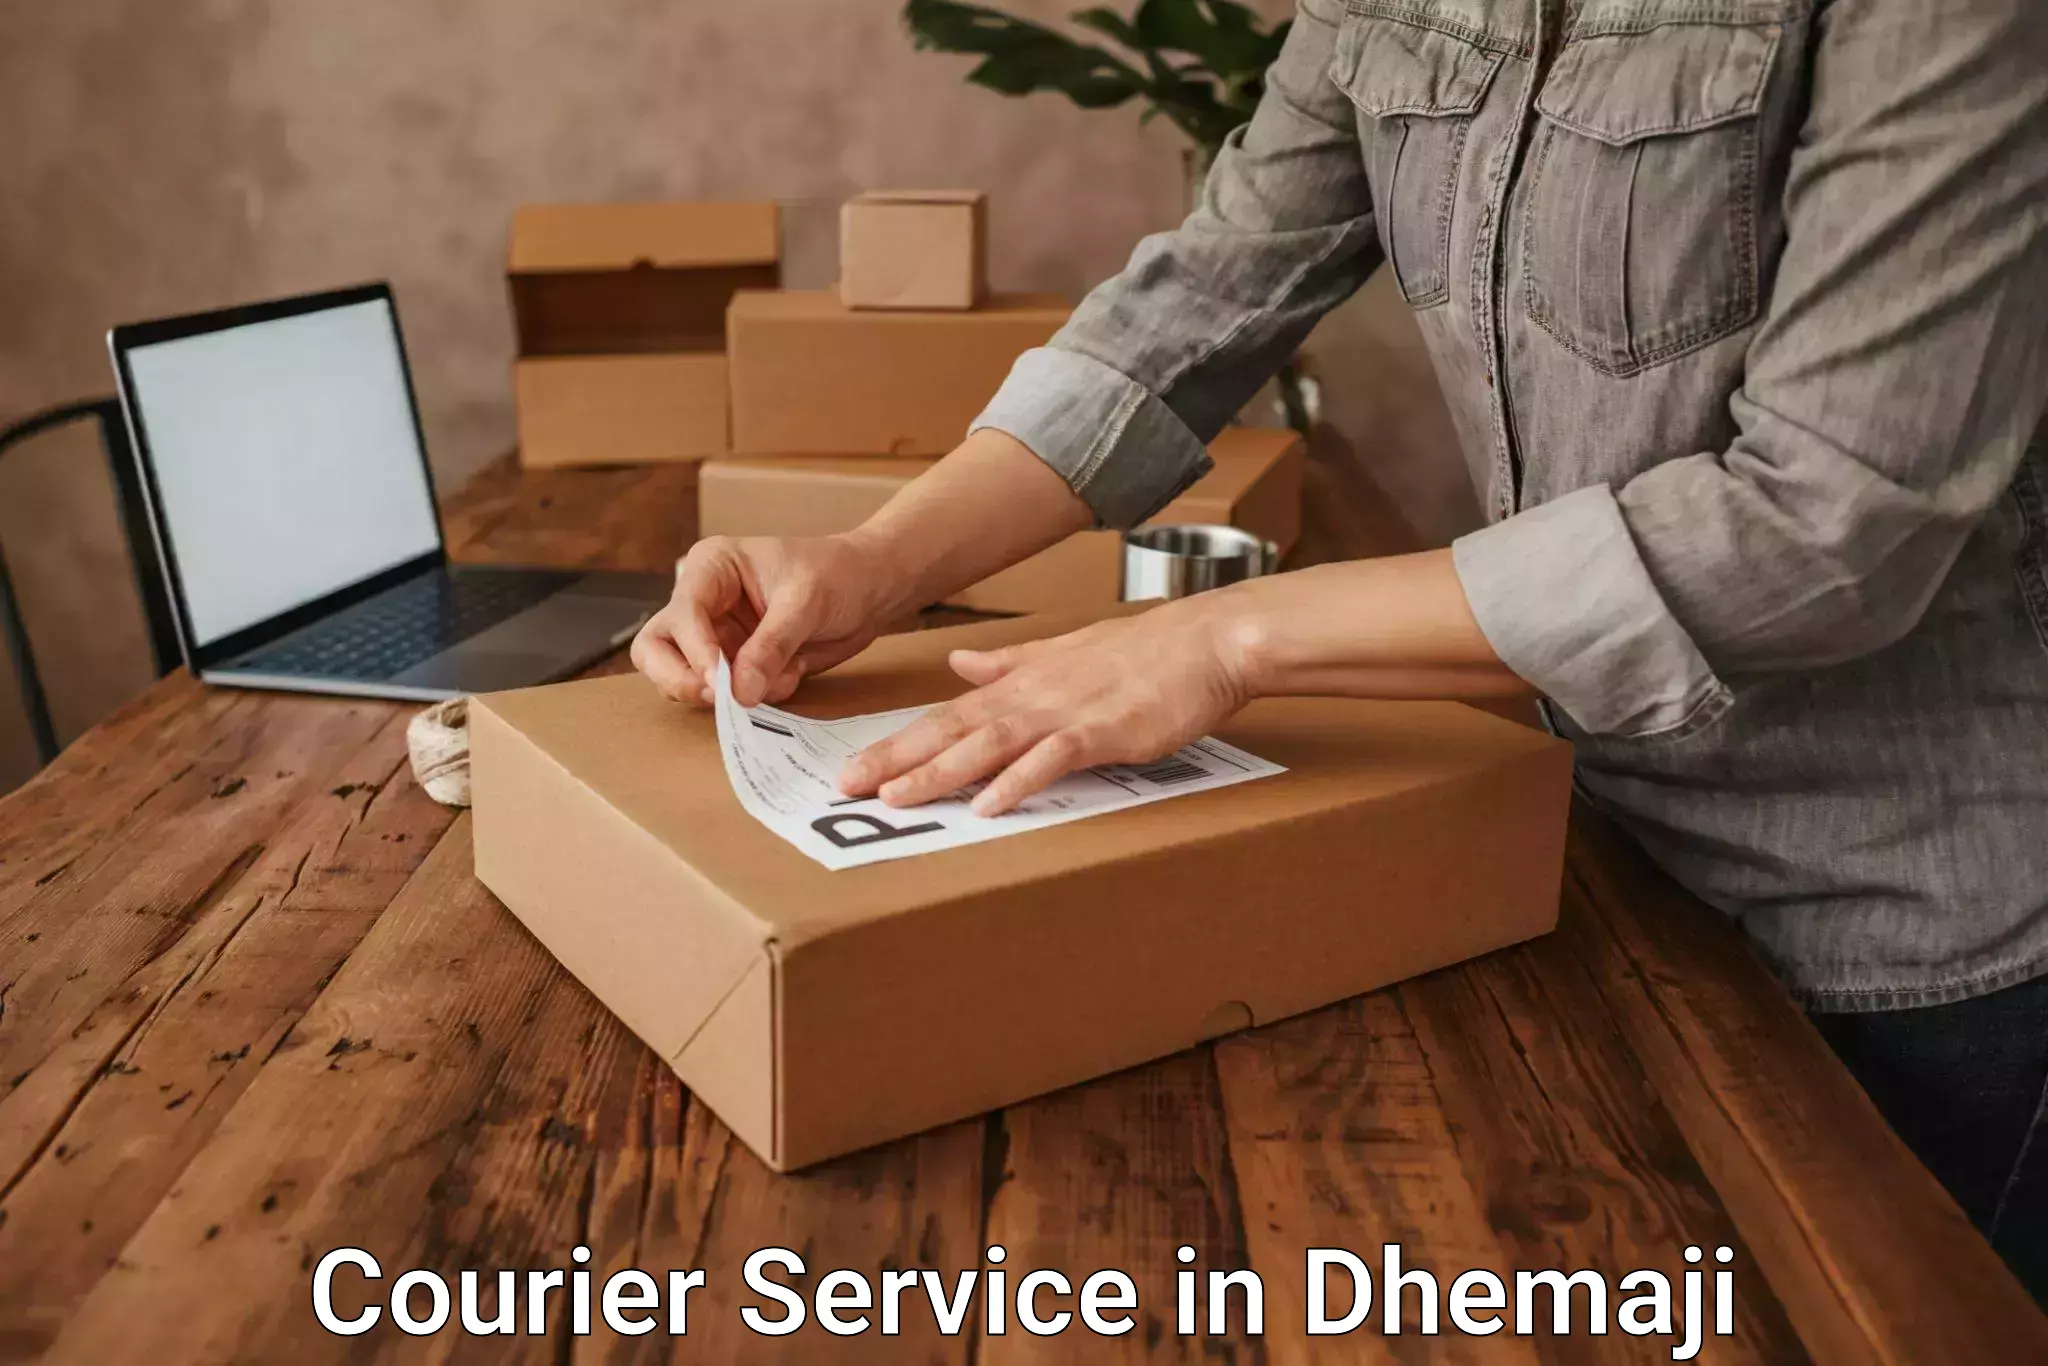 Fast delivery service in Dhemaji